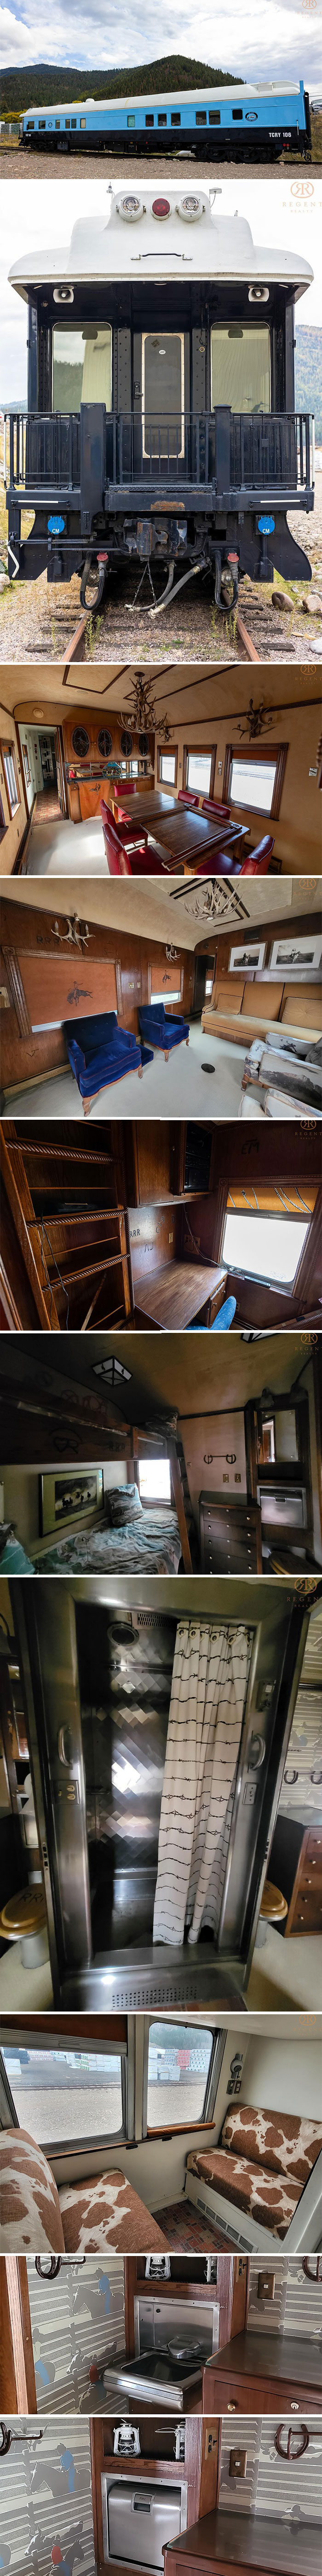 Here’s A Rare Chance To Own And Live In Your Very Own Historic Pullman-Standard 1925 Rail Car (Tcry 106) In Bonner Mt For Only $249,000. Getting Railed Has Never Been Easier